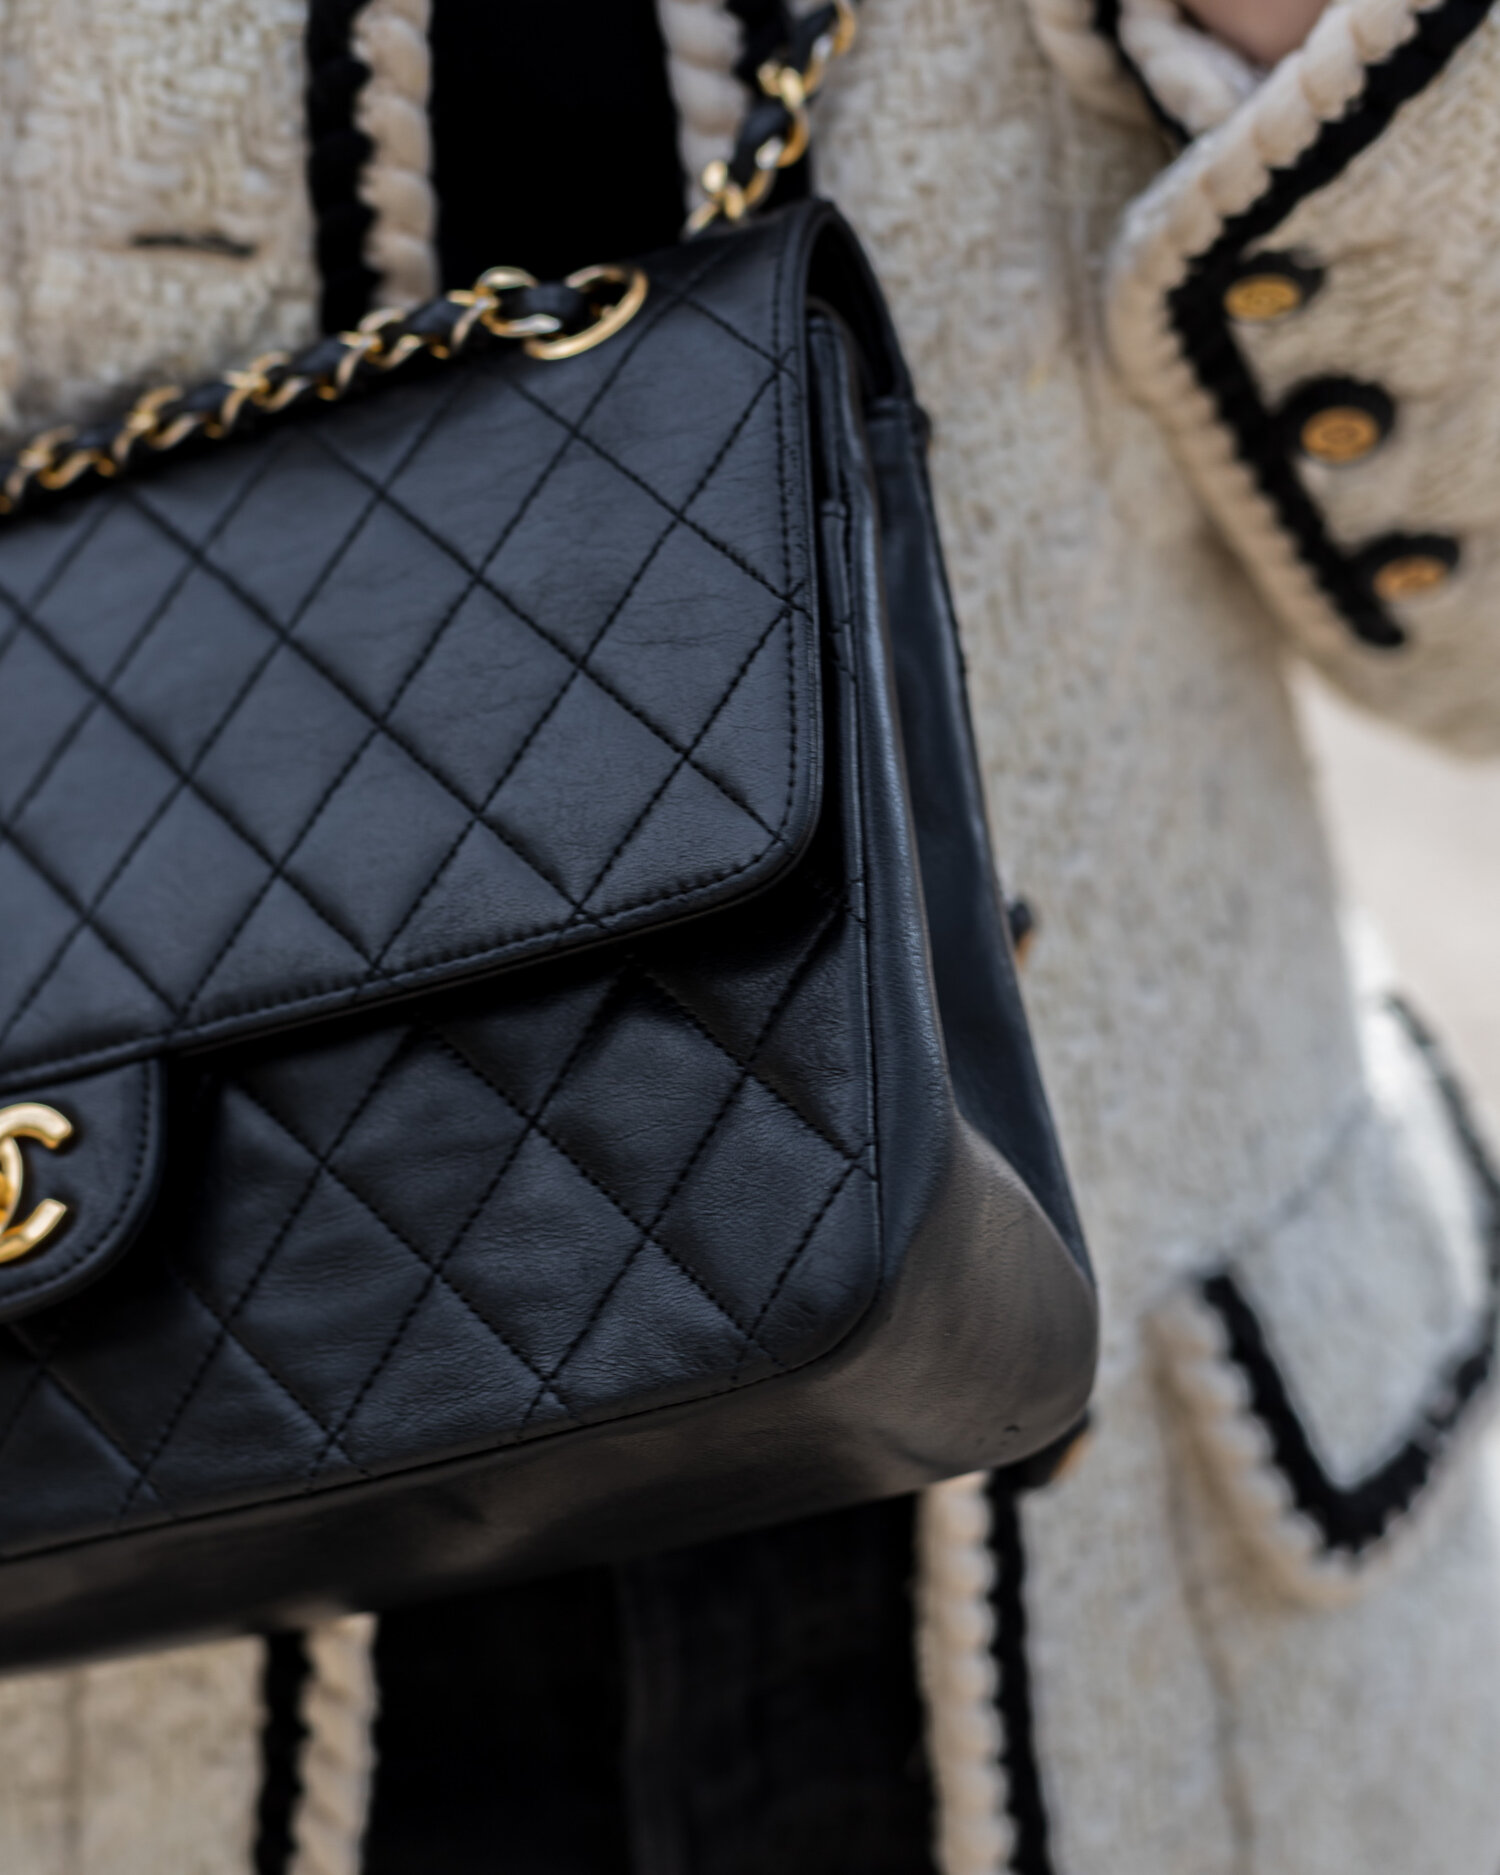 Updated Vintage Chanel Classic Flap Bag 